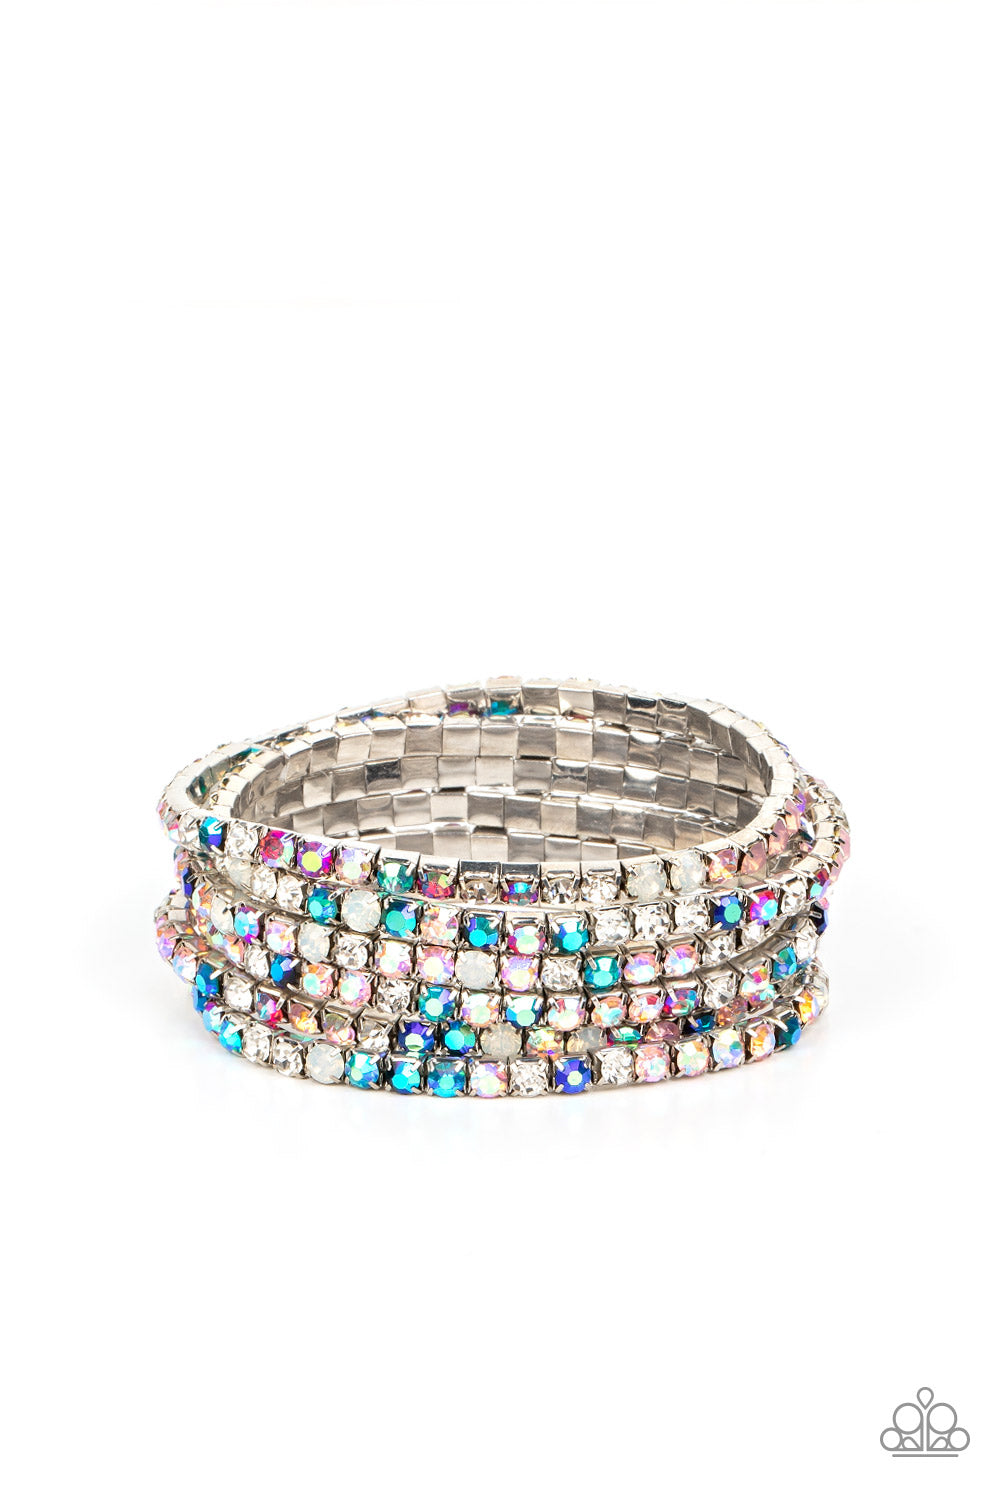 Rock Candy Rage Multi Bracelet - Paparazzi Accessories   Embellished in rhinestone studs, six bracelets threaded along elastic stretchy bands stack across the wrist. Opalescent white, clear, and shades of iridescent in fuchsia, baby pink, and blues create a dramatic collision of color and shimmer. Due to its prismatic palette, color may vary.  Sold as set of six bracelets.  December 2022 Life of the Party!